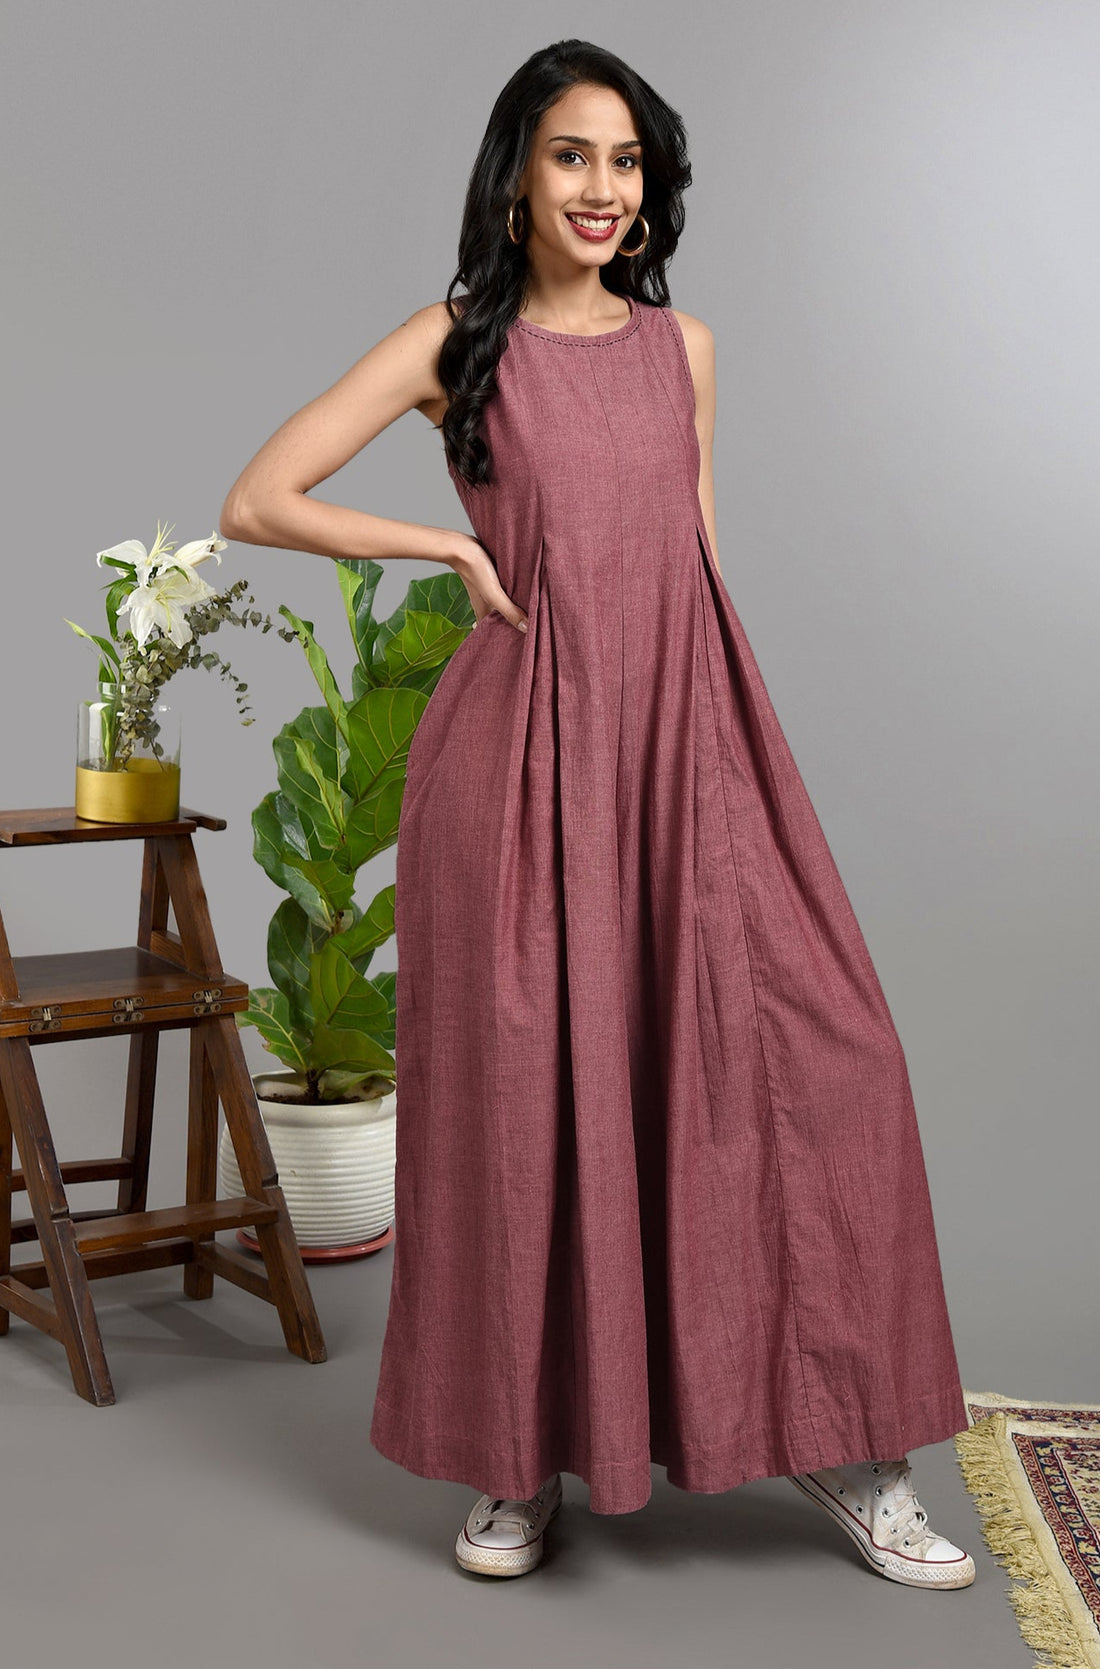 Long ankle length sleeveless jumpsuit in subtle buff pink with back zipper and box pleat and pockets